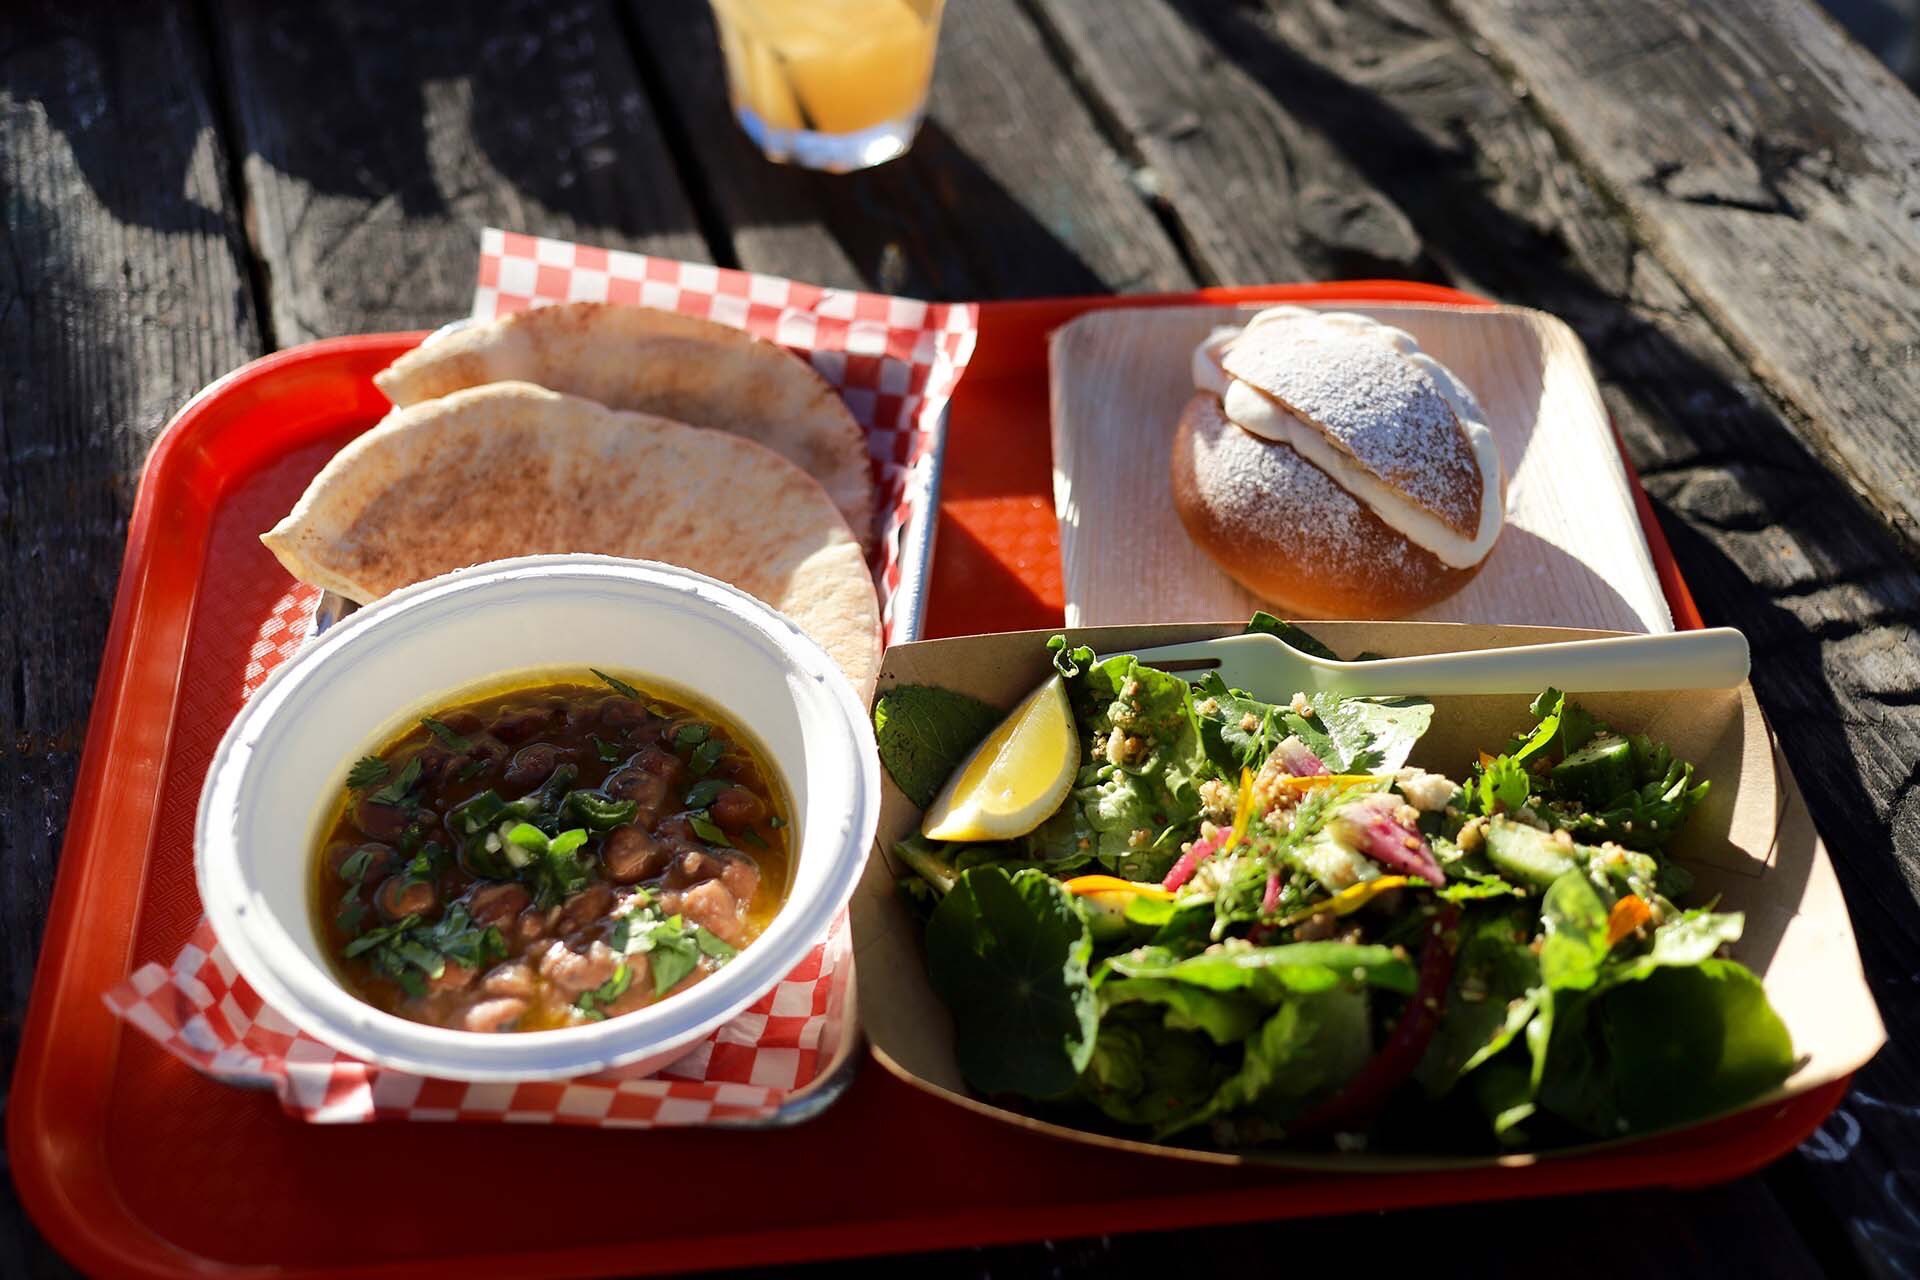 a tray of Palestinian food is served at an outdoor patio in Oakland